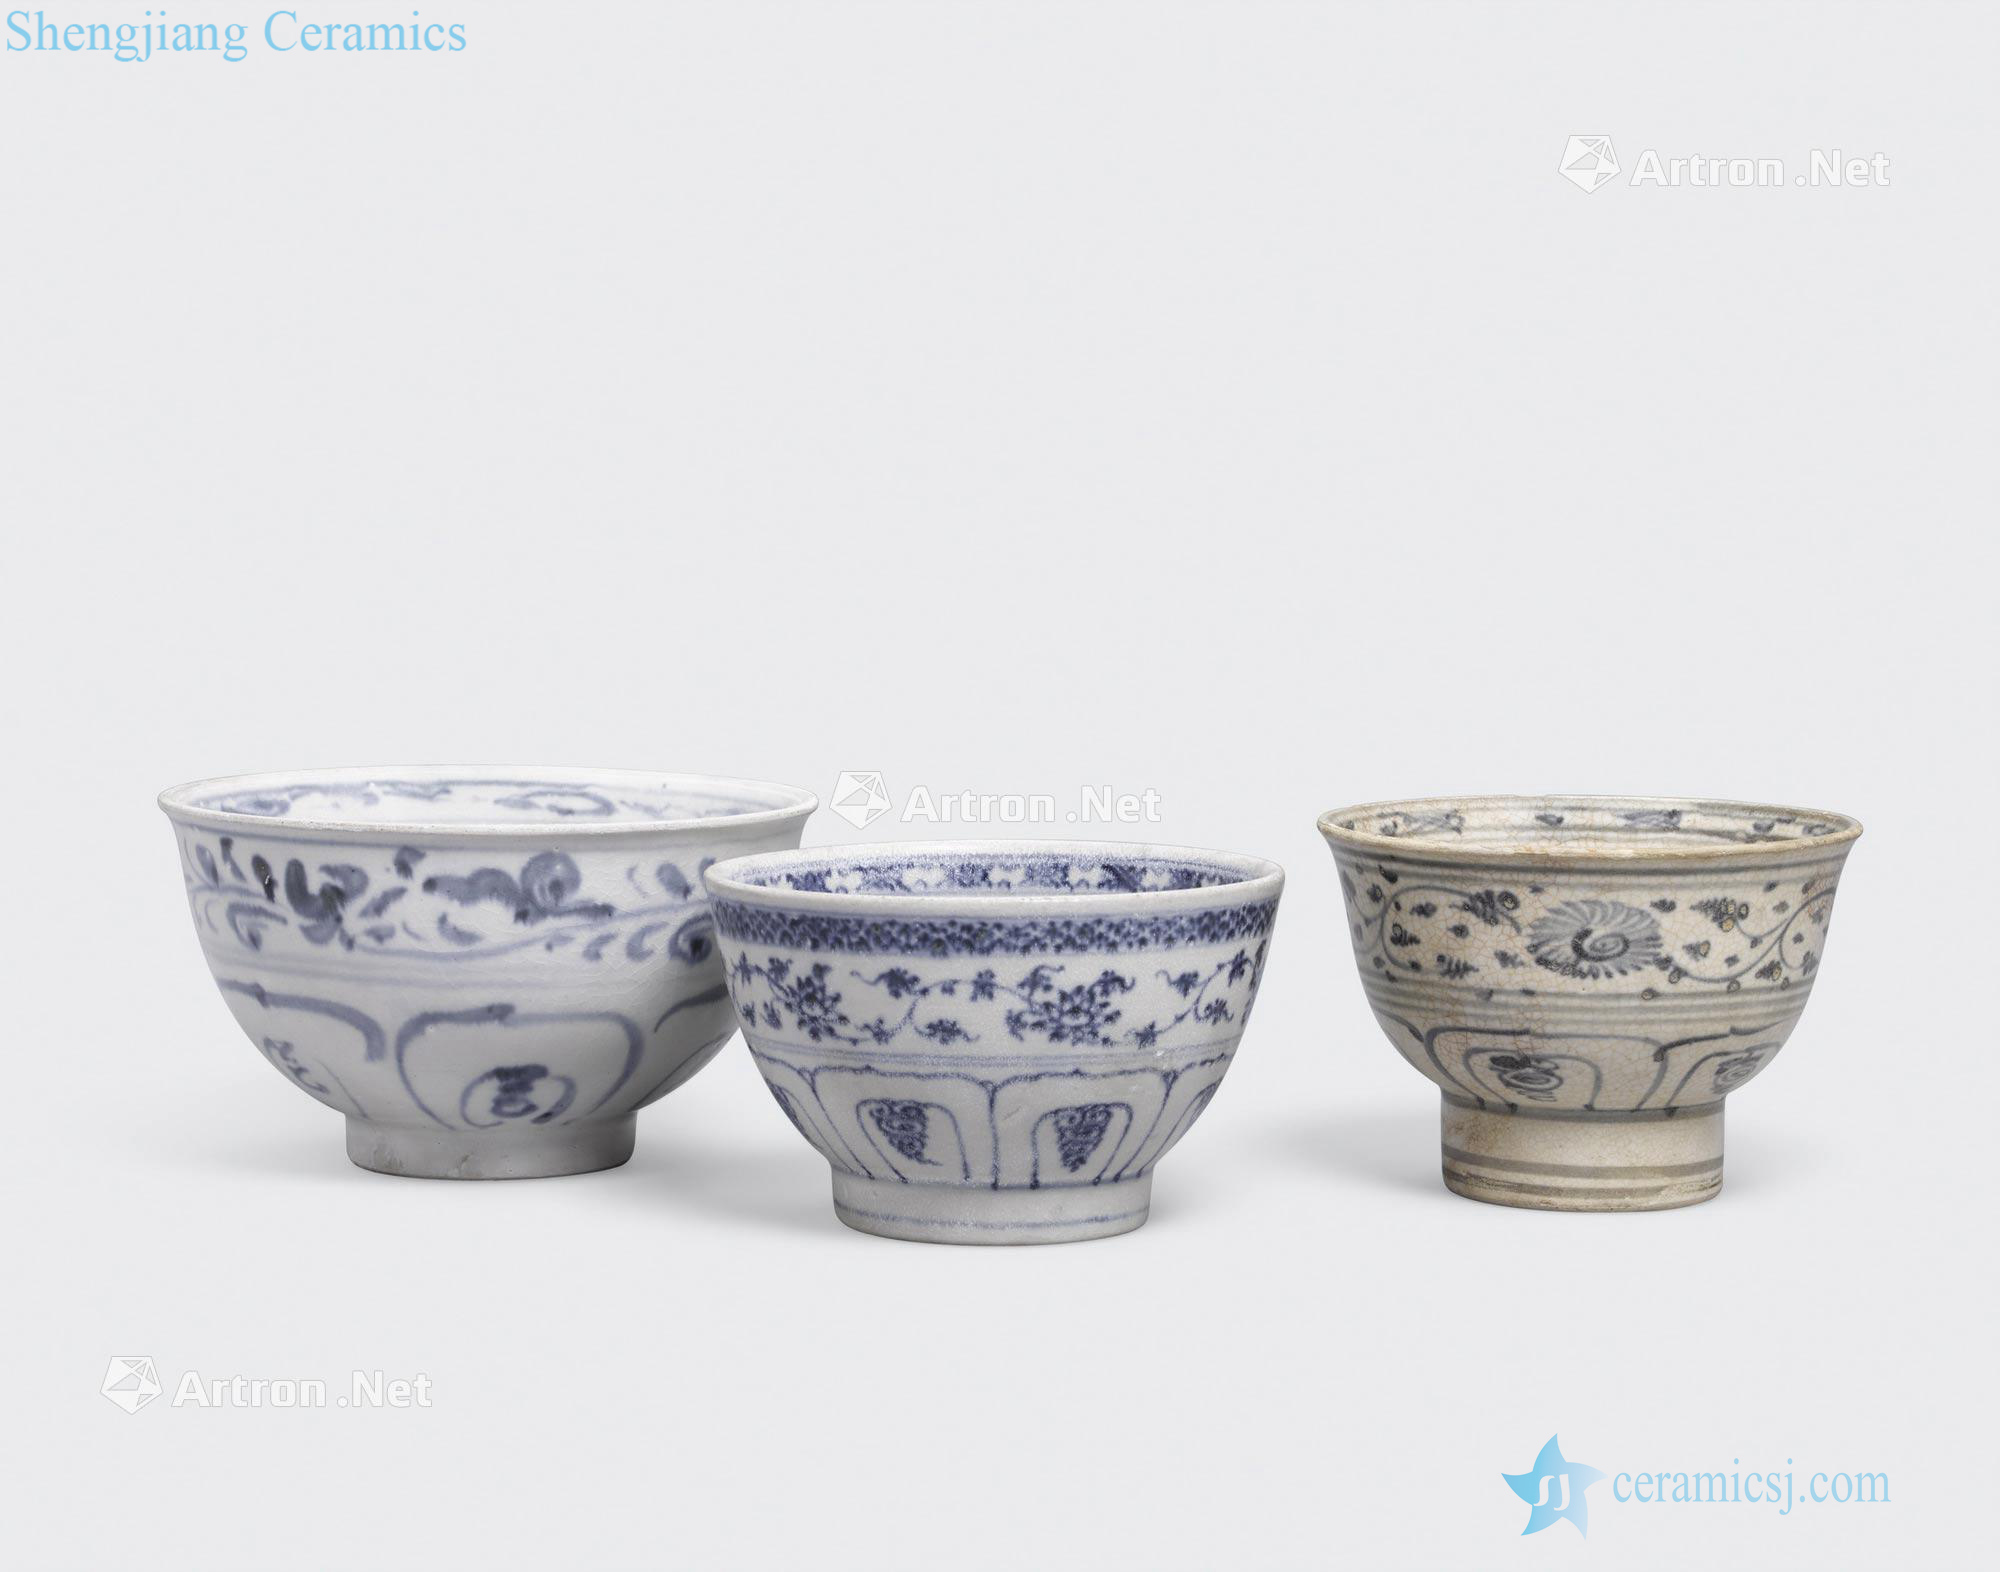 Le dynasty, 15 th - 16 th century A GROUP OF THREE BLUE AND WHITE BOWLS WITH TALL FEET